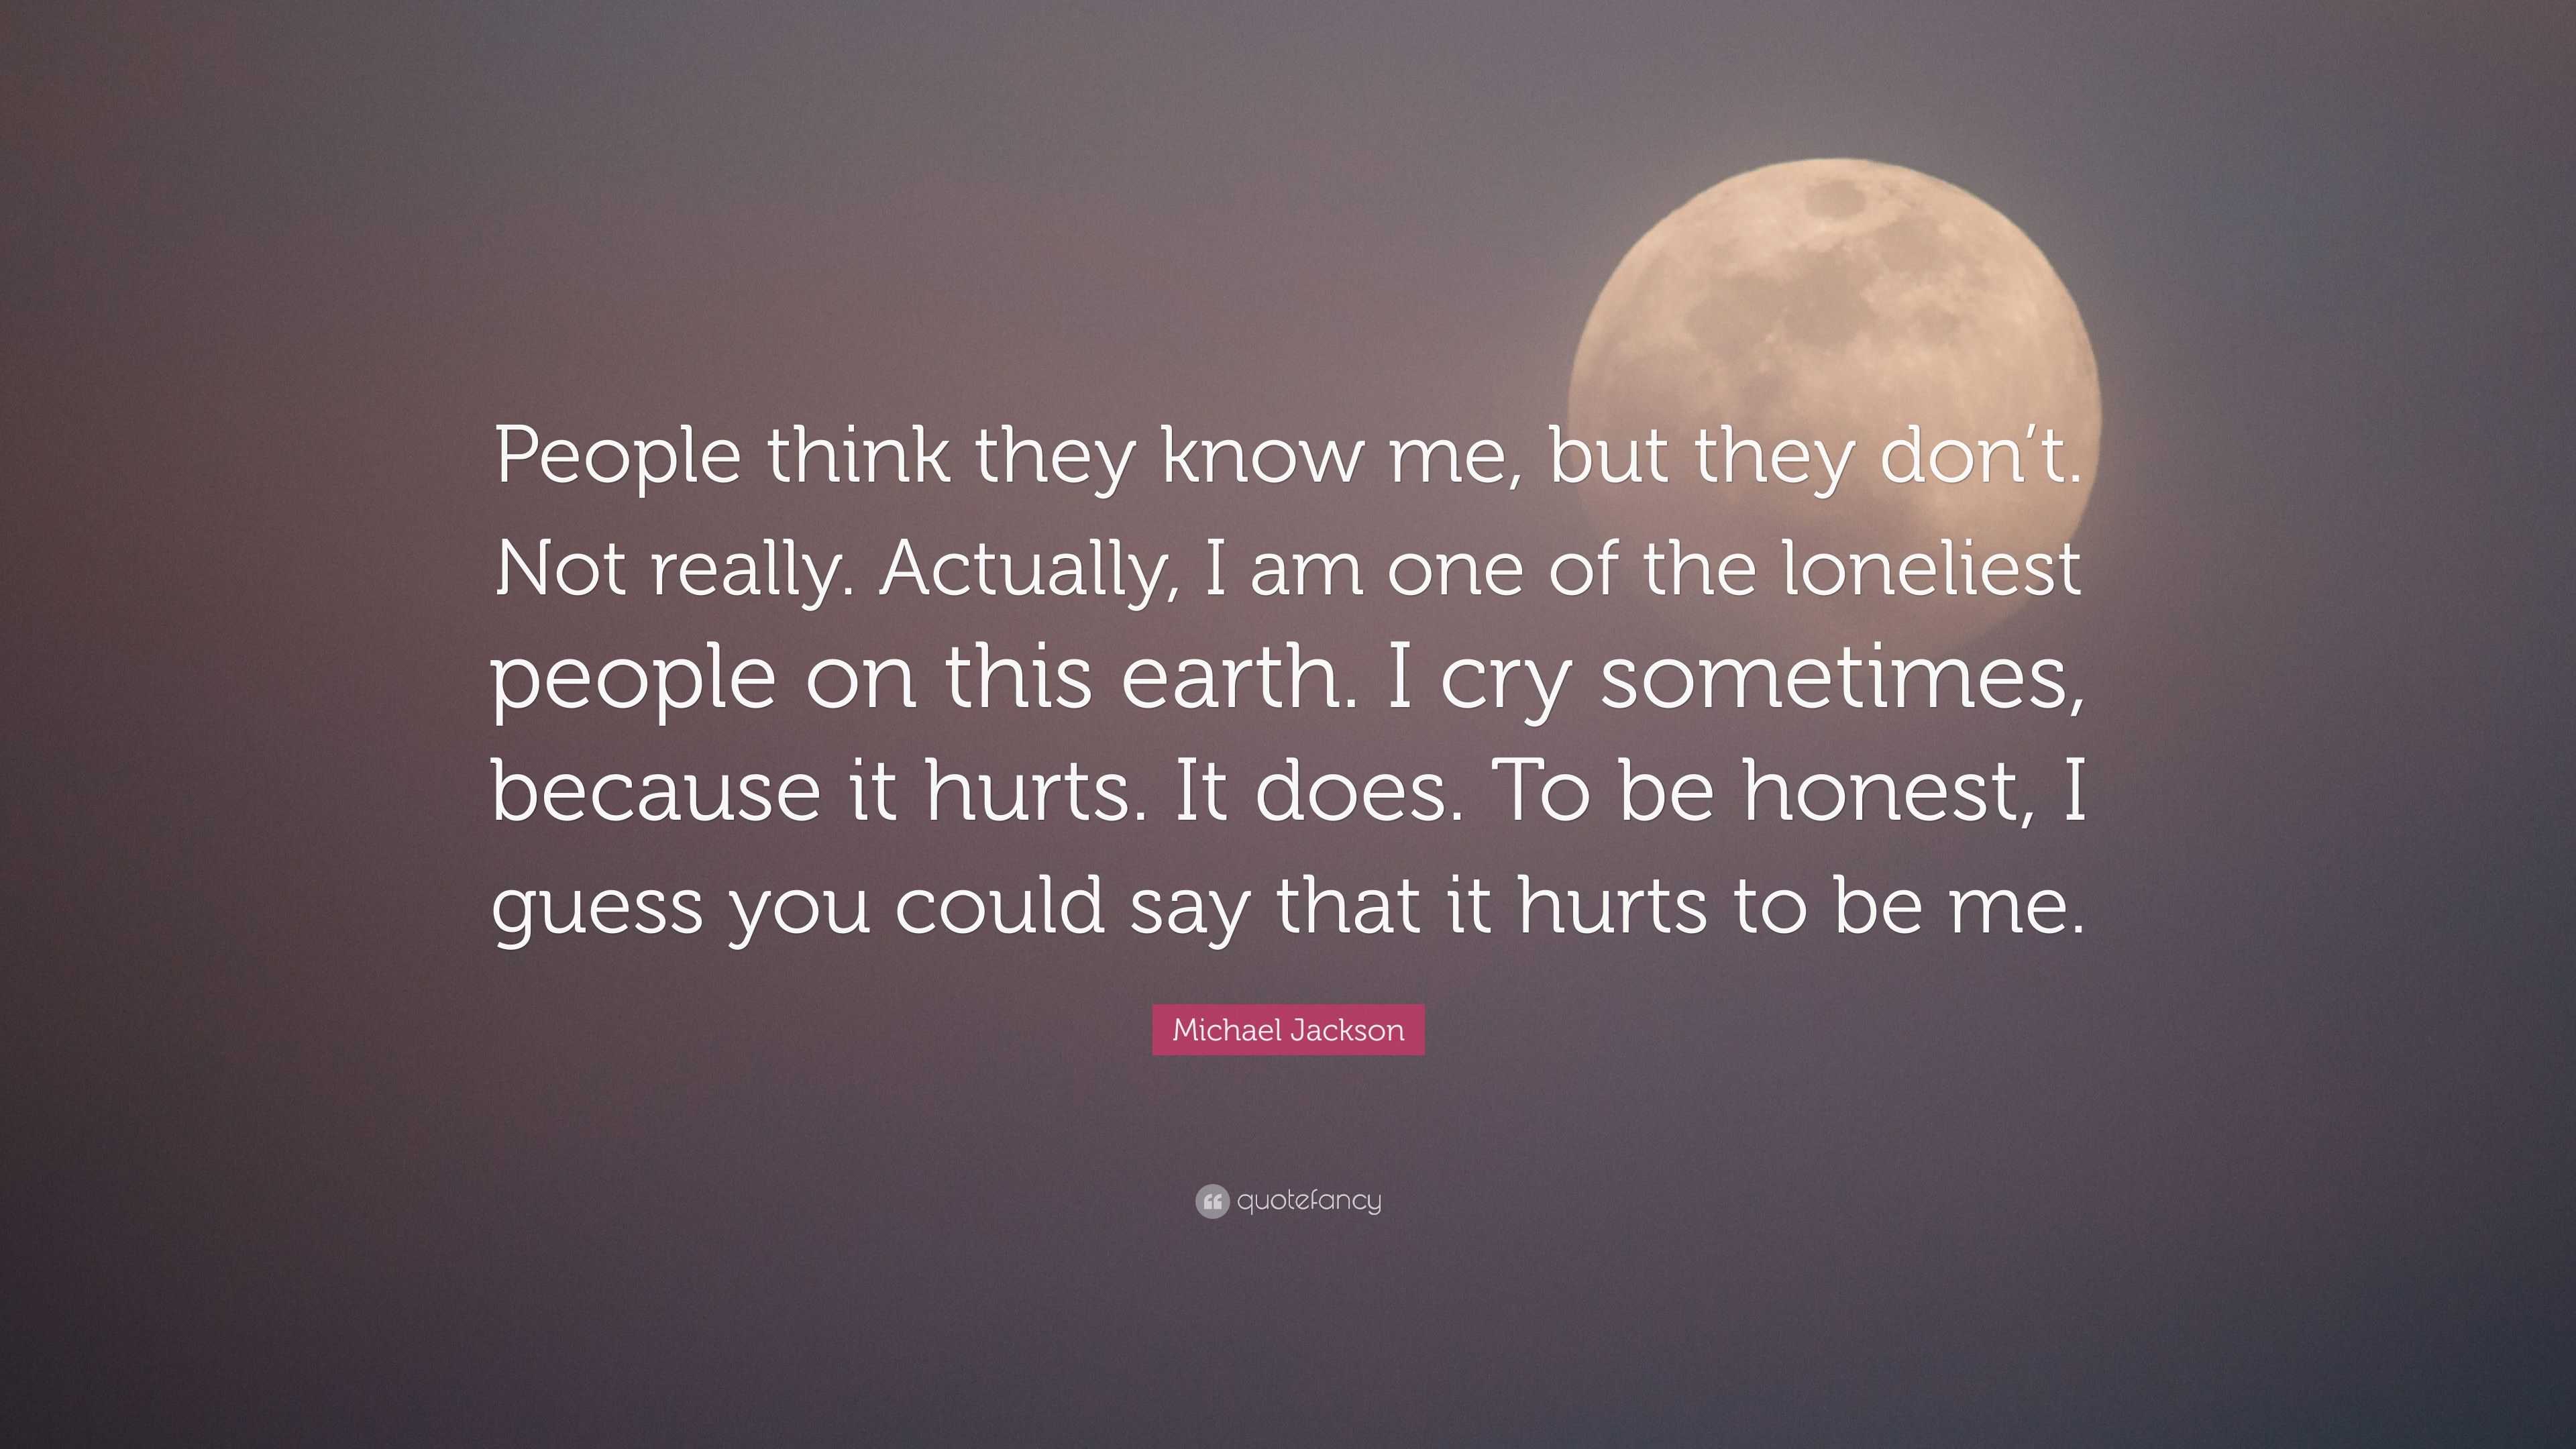 ressource Krympe Forsendelse Michael Jackson Quote: “People think they know me, but they don't. Not  really. Actually, I am one of the loneliest people on this earth. I cry  s...”